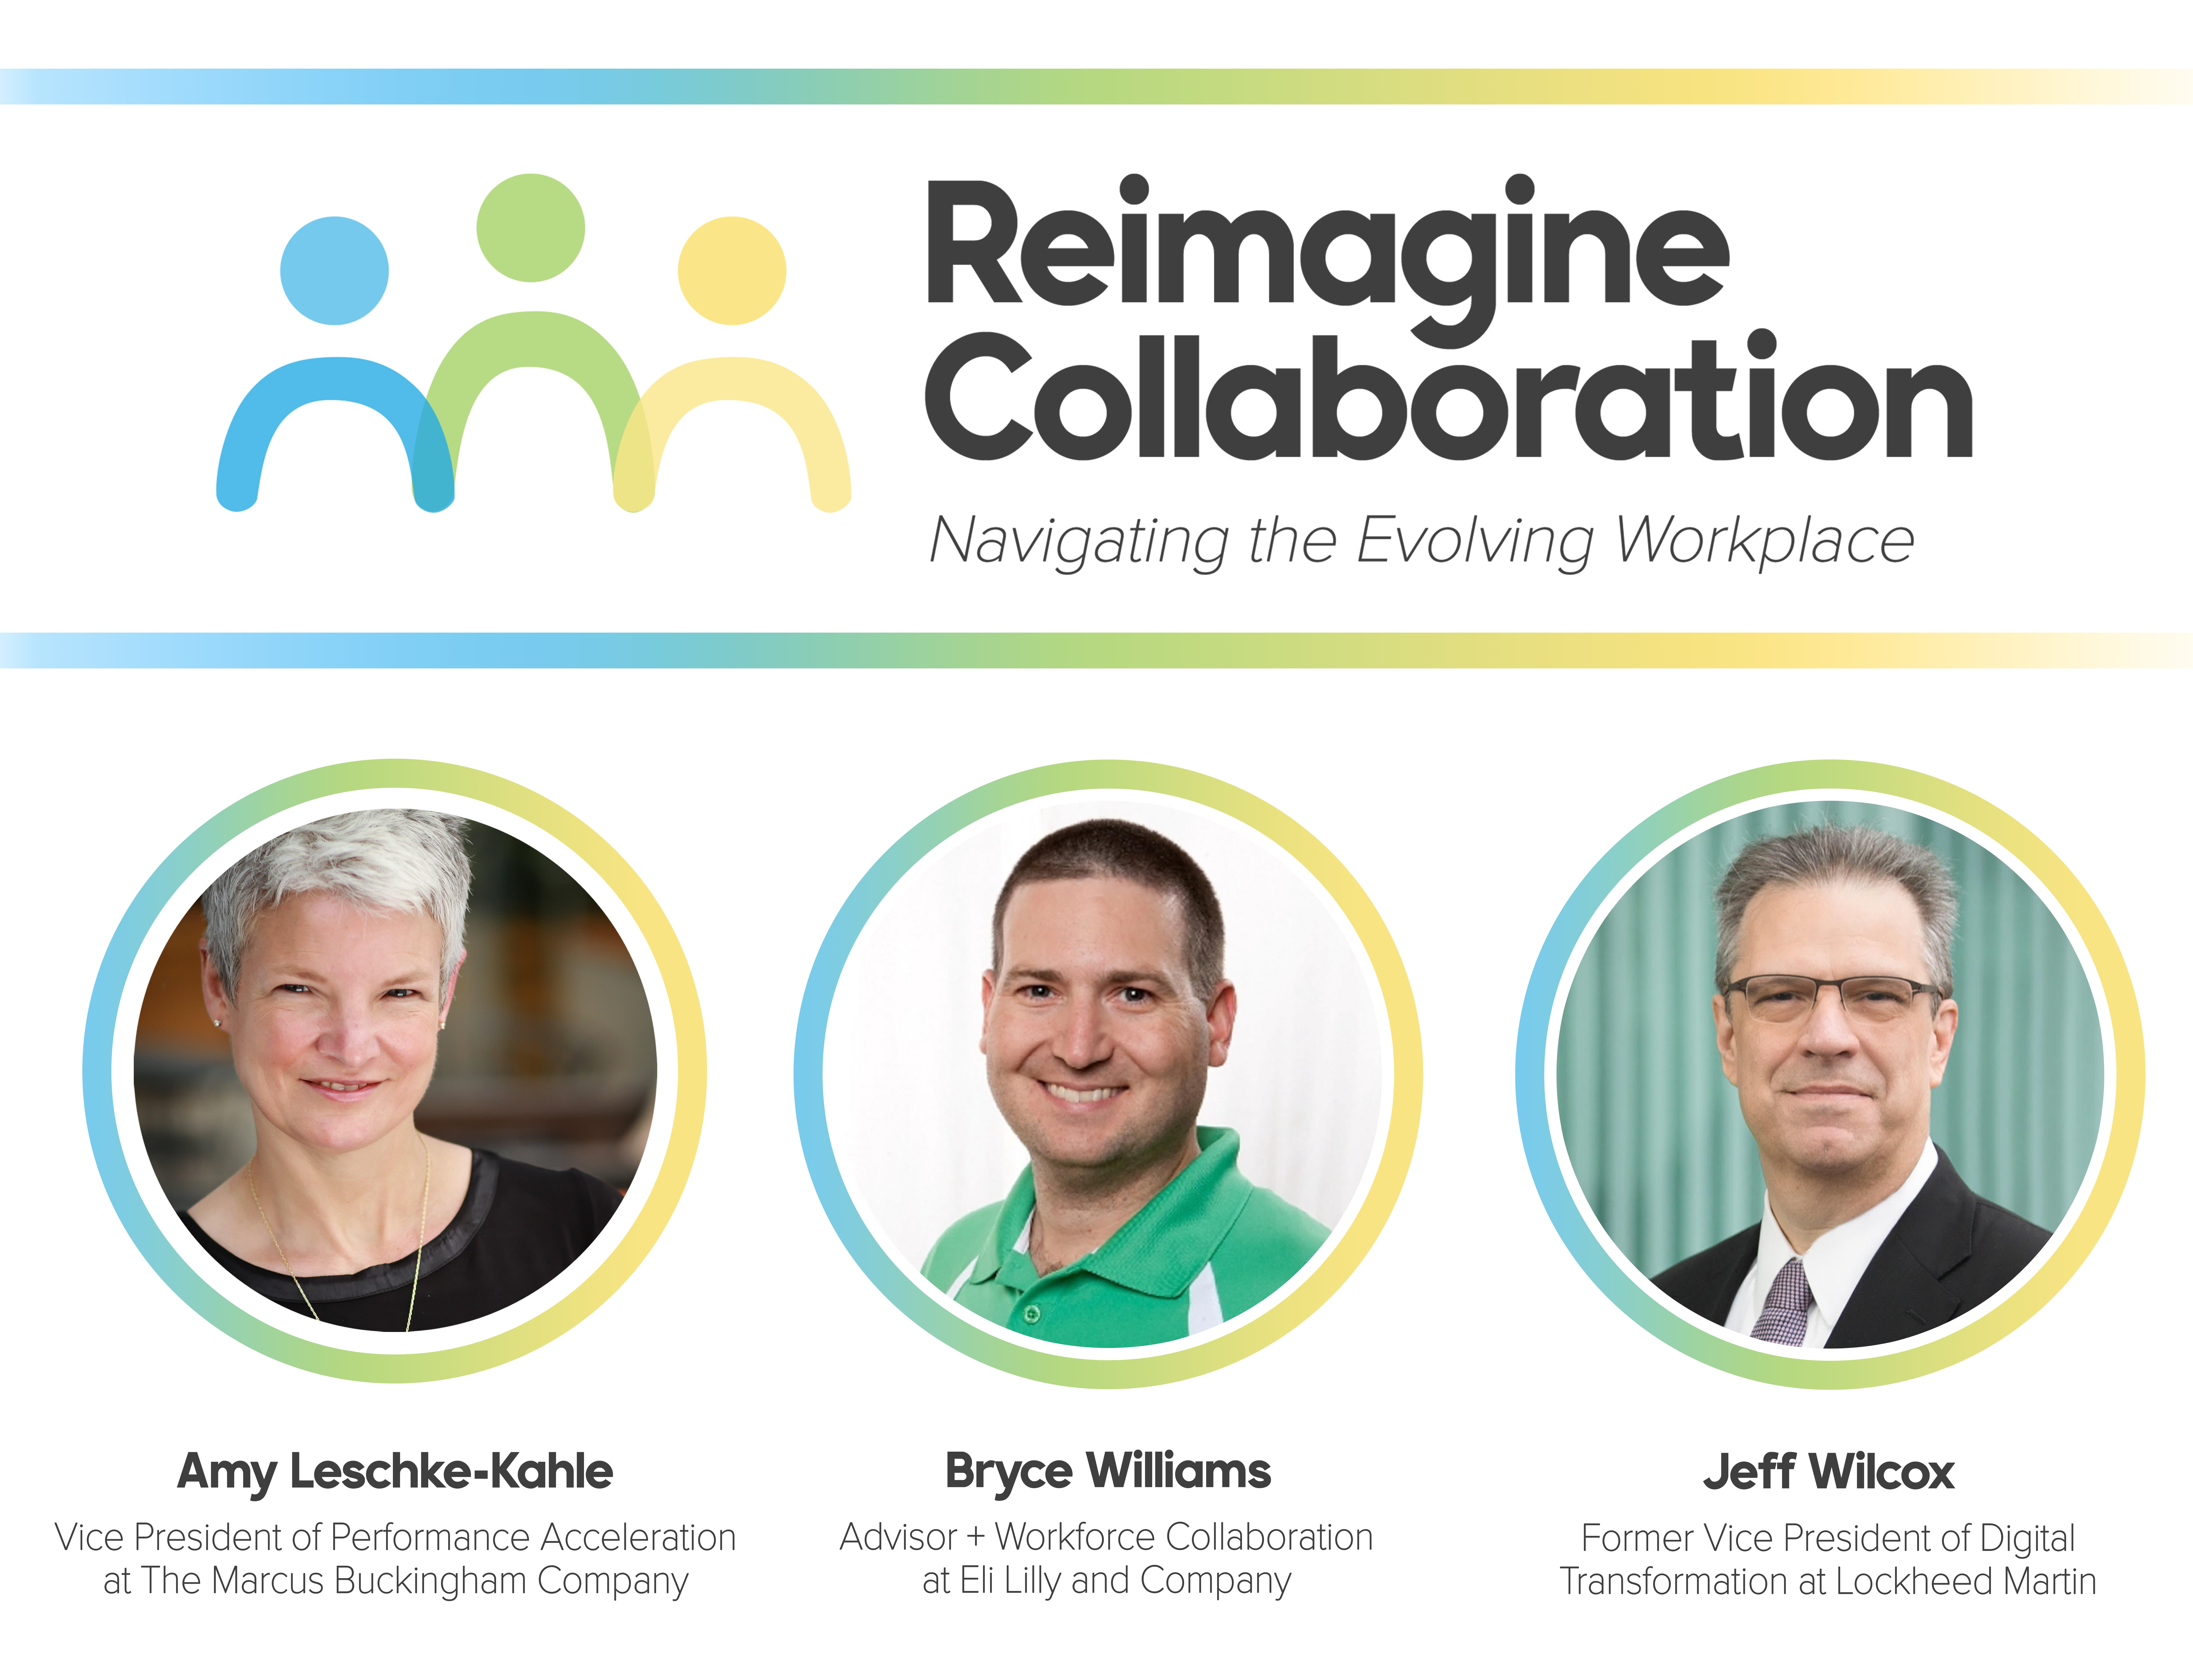 Reimagine Collaboration Speakers Amy Leschke-Kahle (Vice President of Performance Acceleration at The Marcus Buckingham Company), Bryce Williams (Advisor + Workforce Collaboration at Eli Lily and Company), Jeff Wilcox (Former Vice President of Digital Transformation at Lockheed Martin)